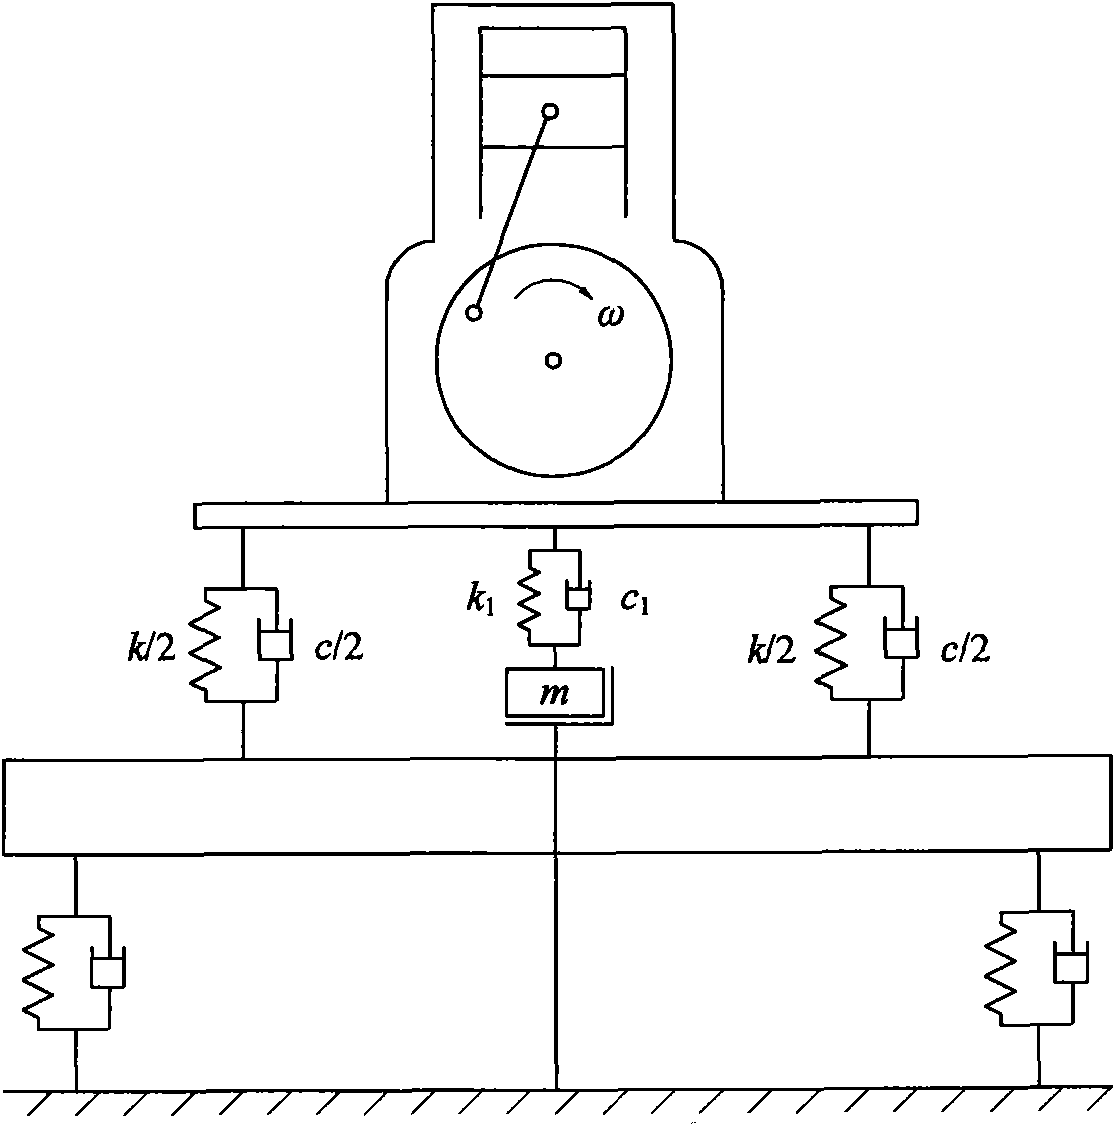 Two-free endpoint dynamic vibration absorber